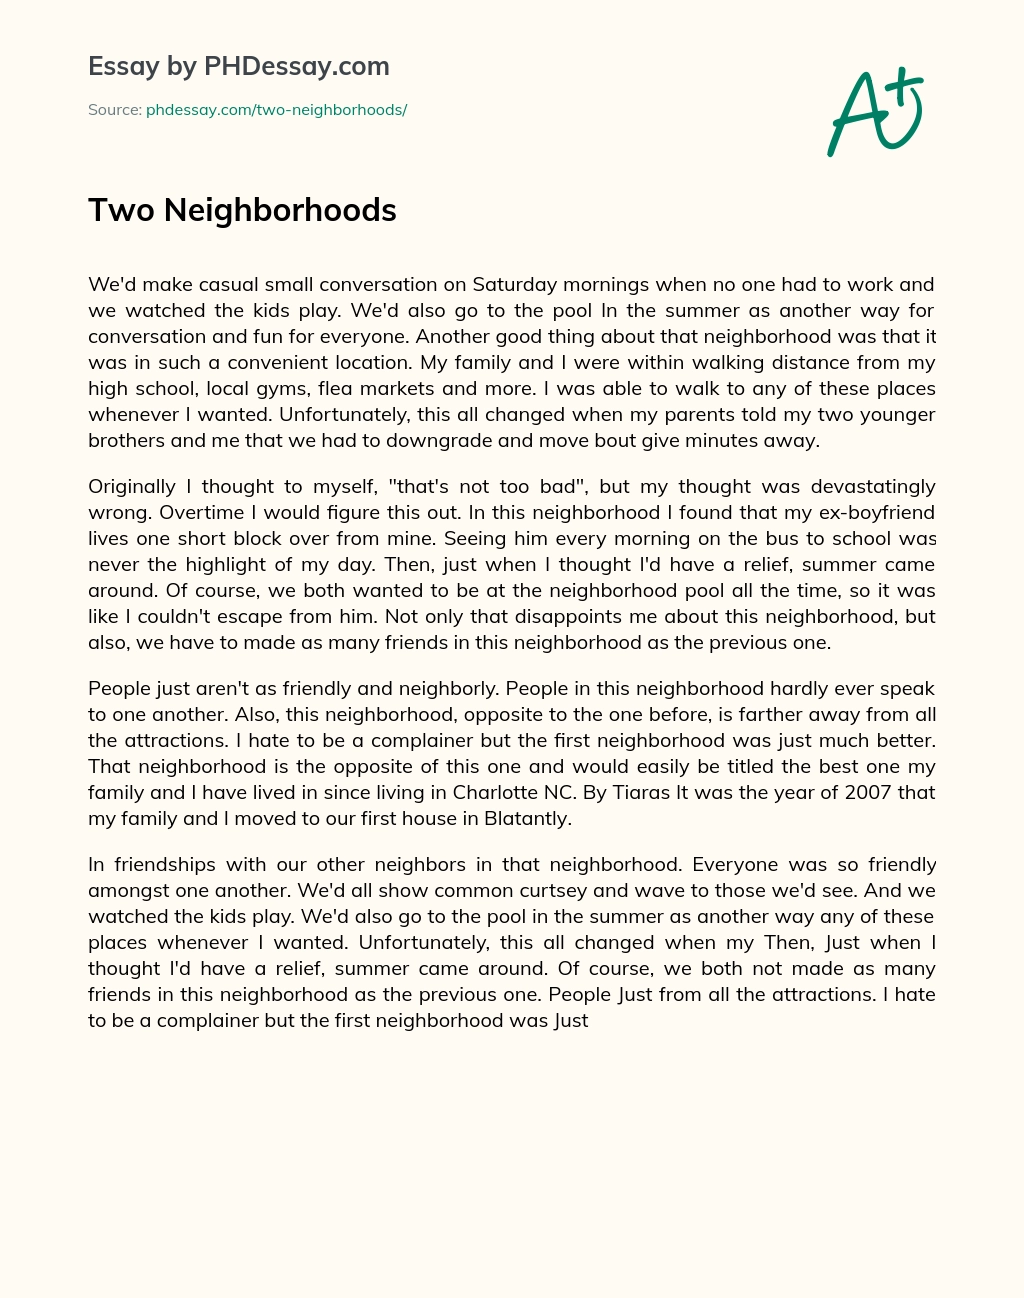 compare and contrast two neighborhoods essay